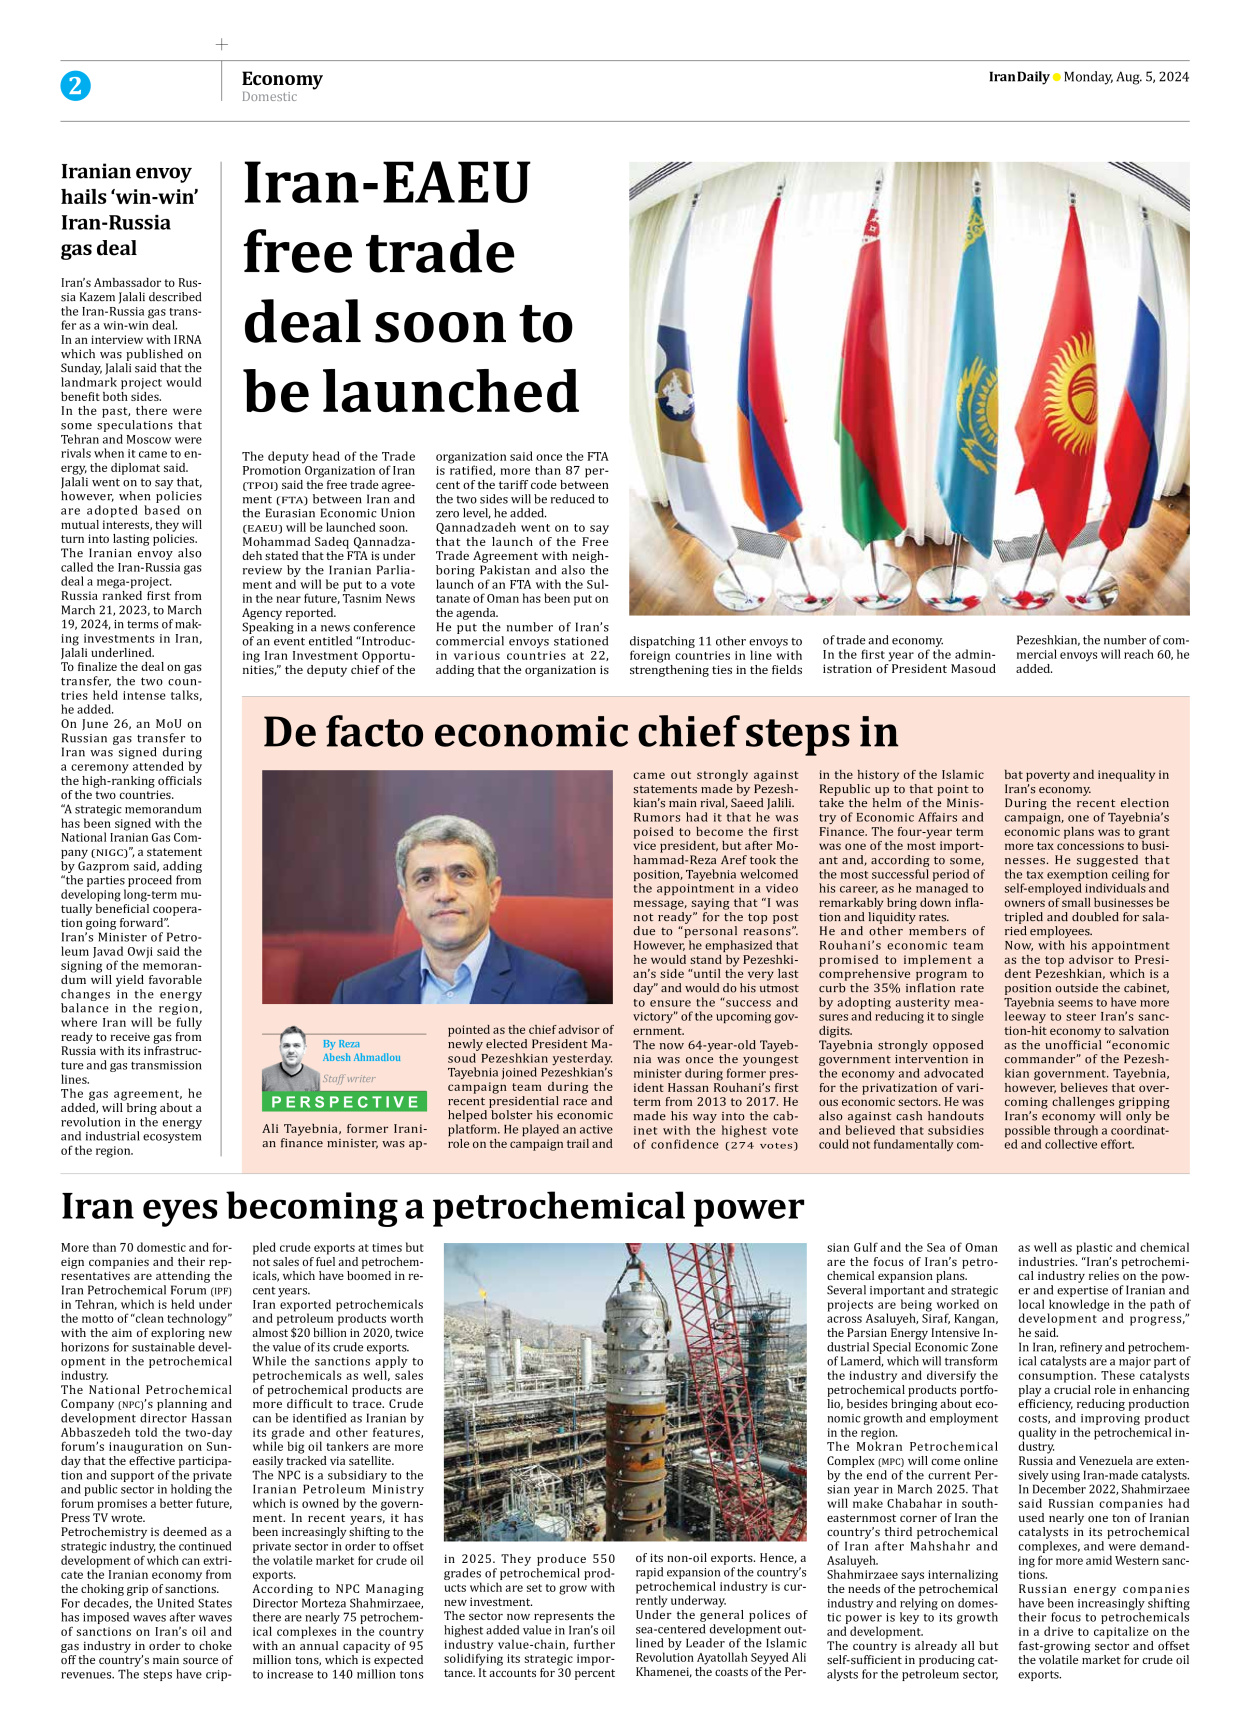 Iran Daily - Number Seven Thousand Six Hundred and Twenty - 05 August 2024 - Page 2